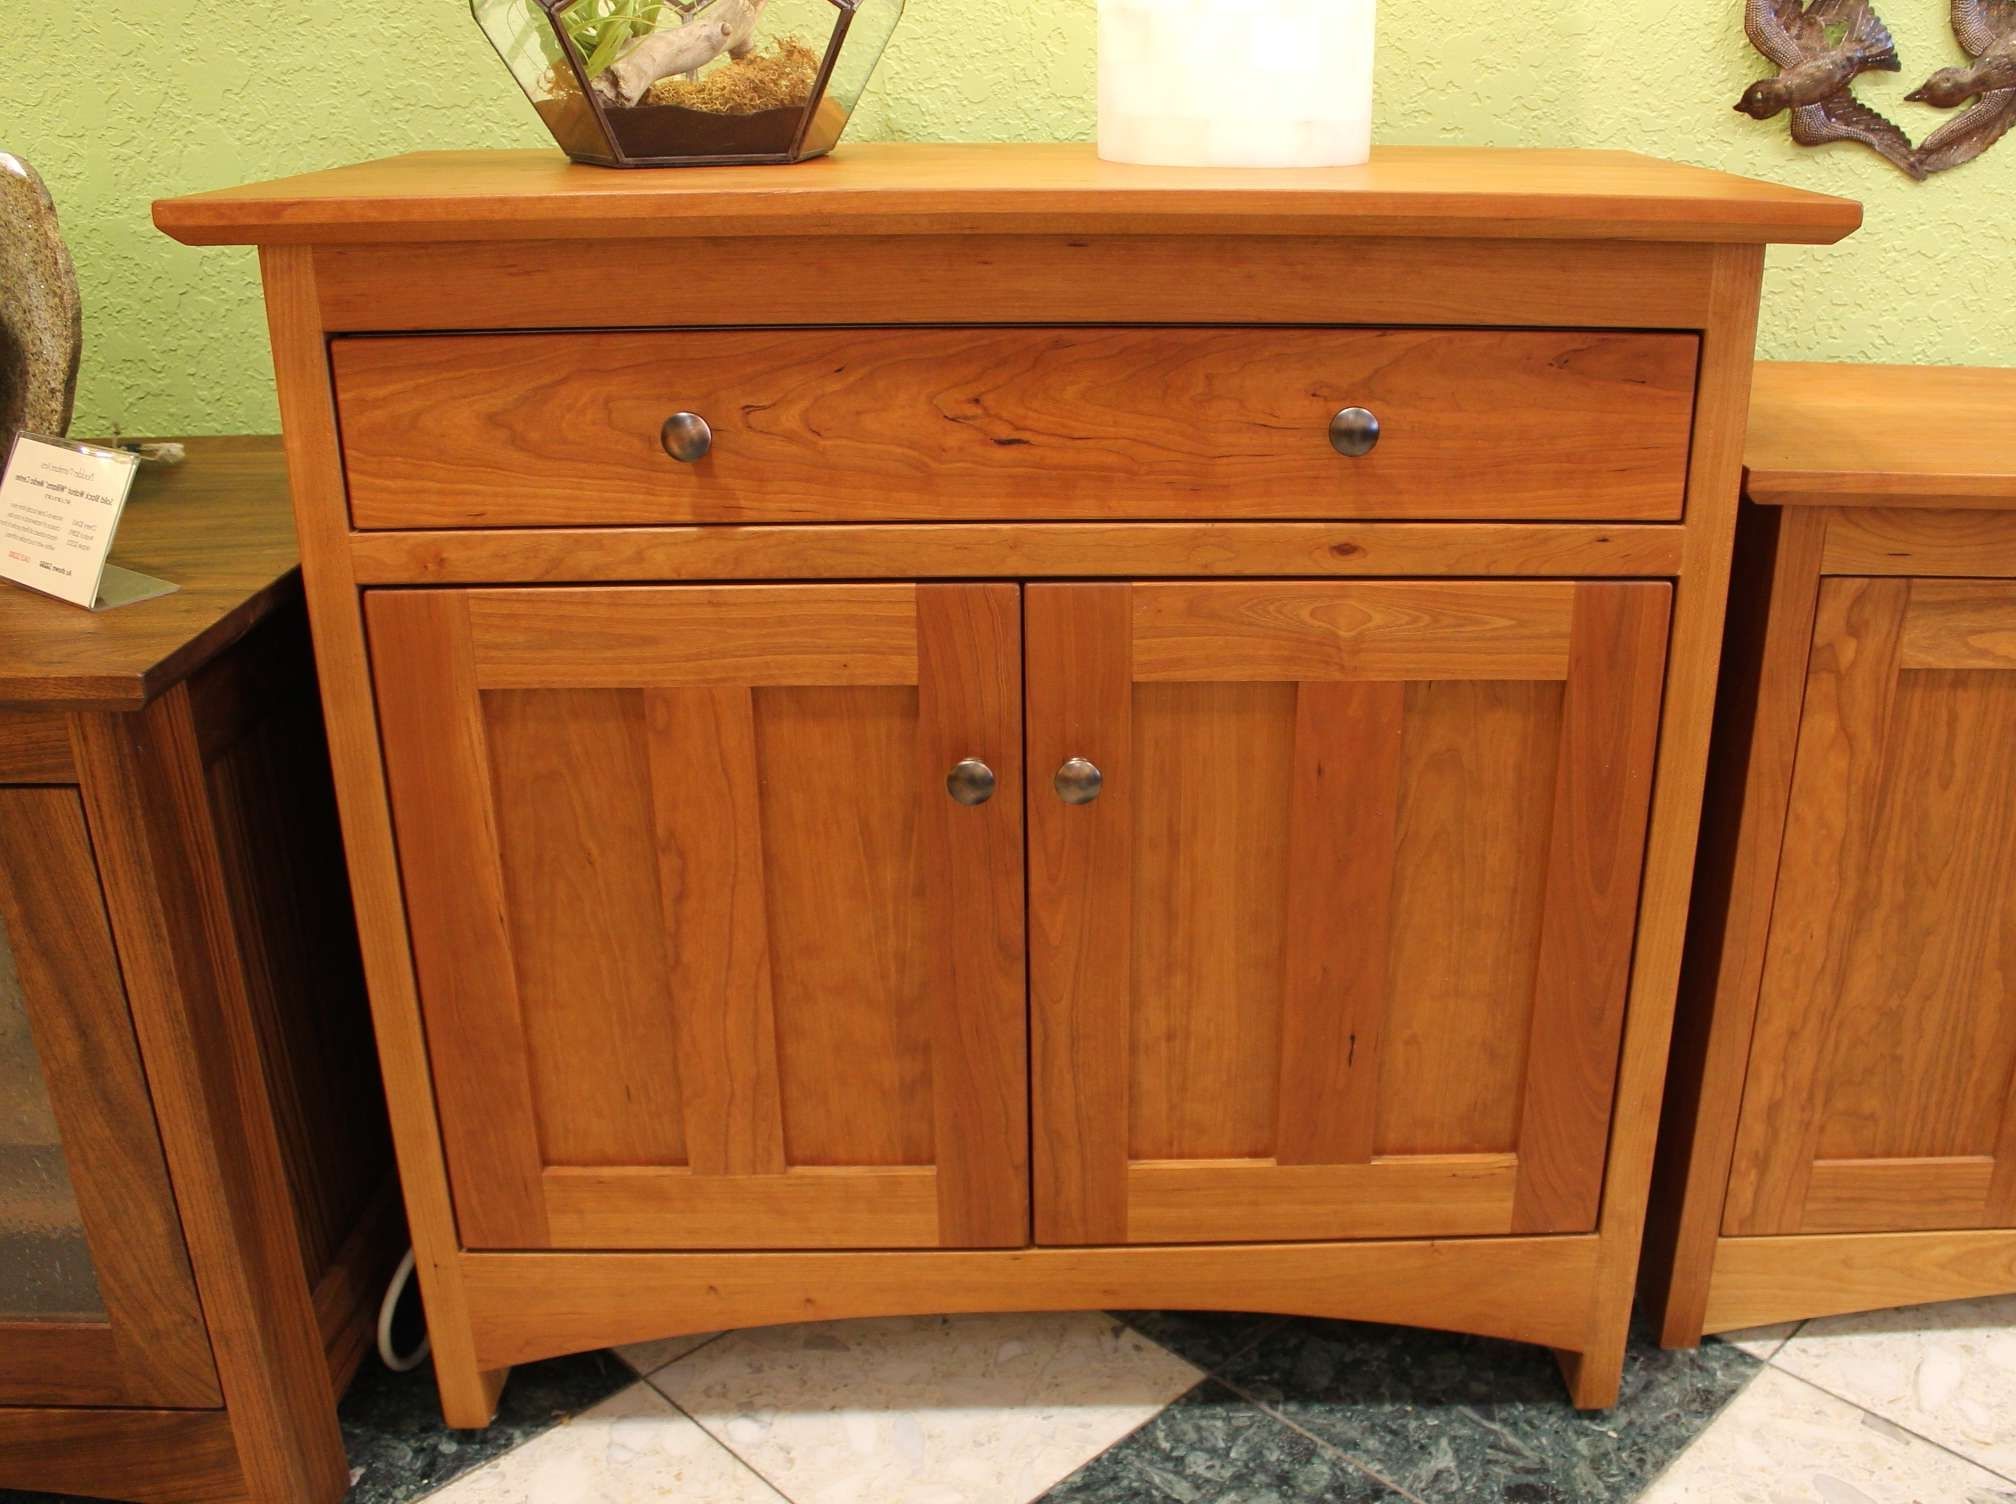 Cherry "prairie" Two Door Sideboard | Boulder Furniture Arts With Cherry Sideboards (View 3 of 20)